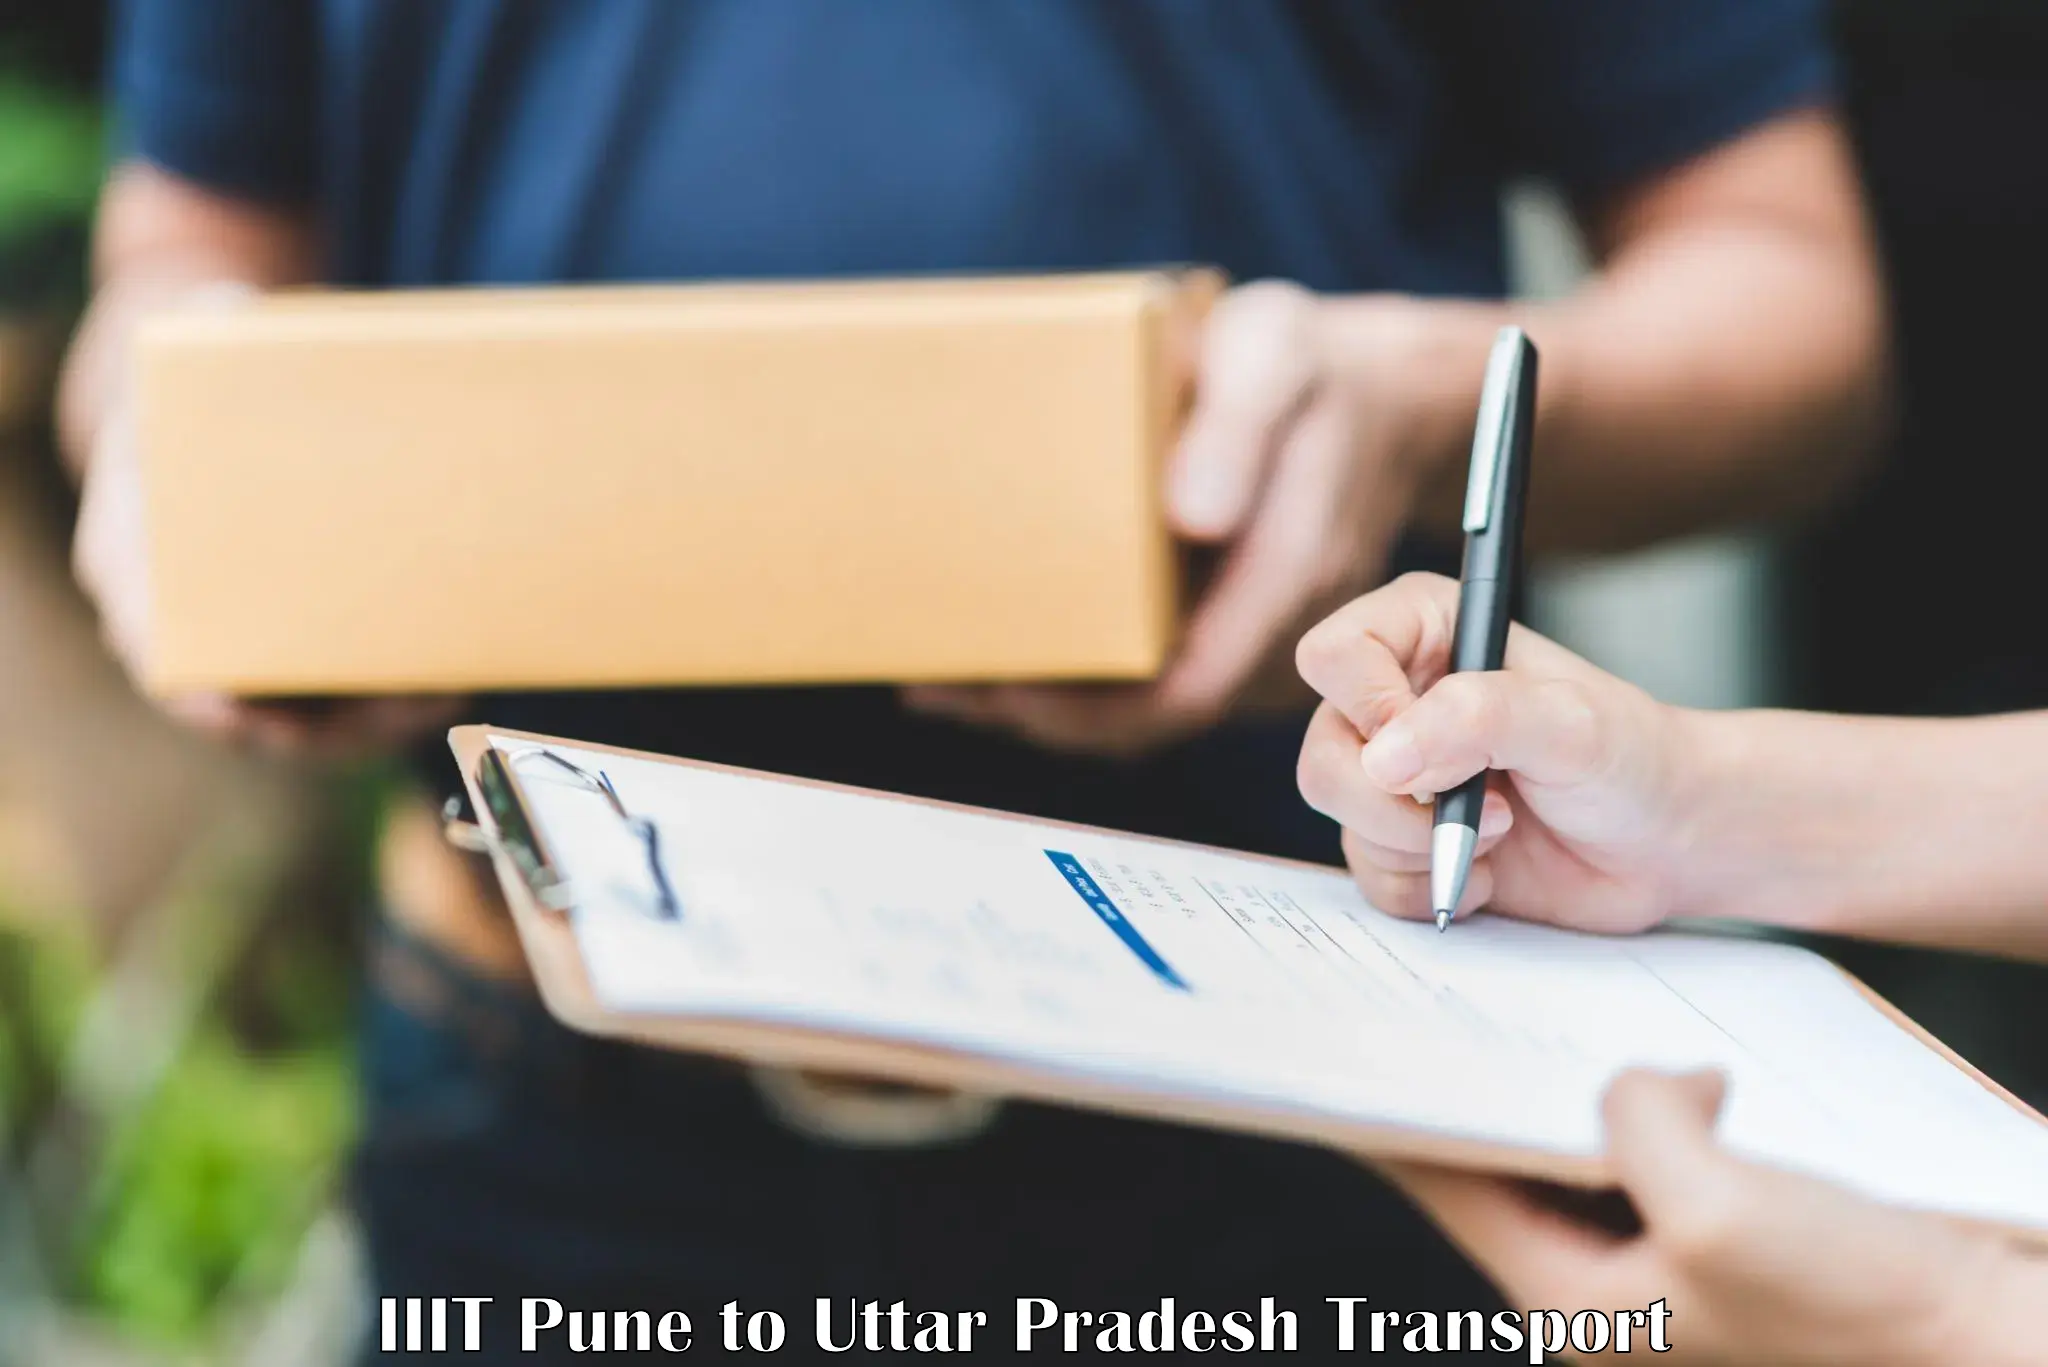 Nearby transport service IIIT Pune to Bareilly